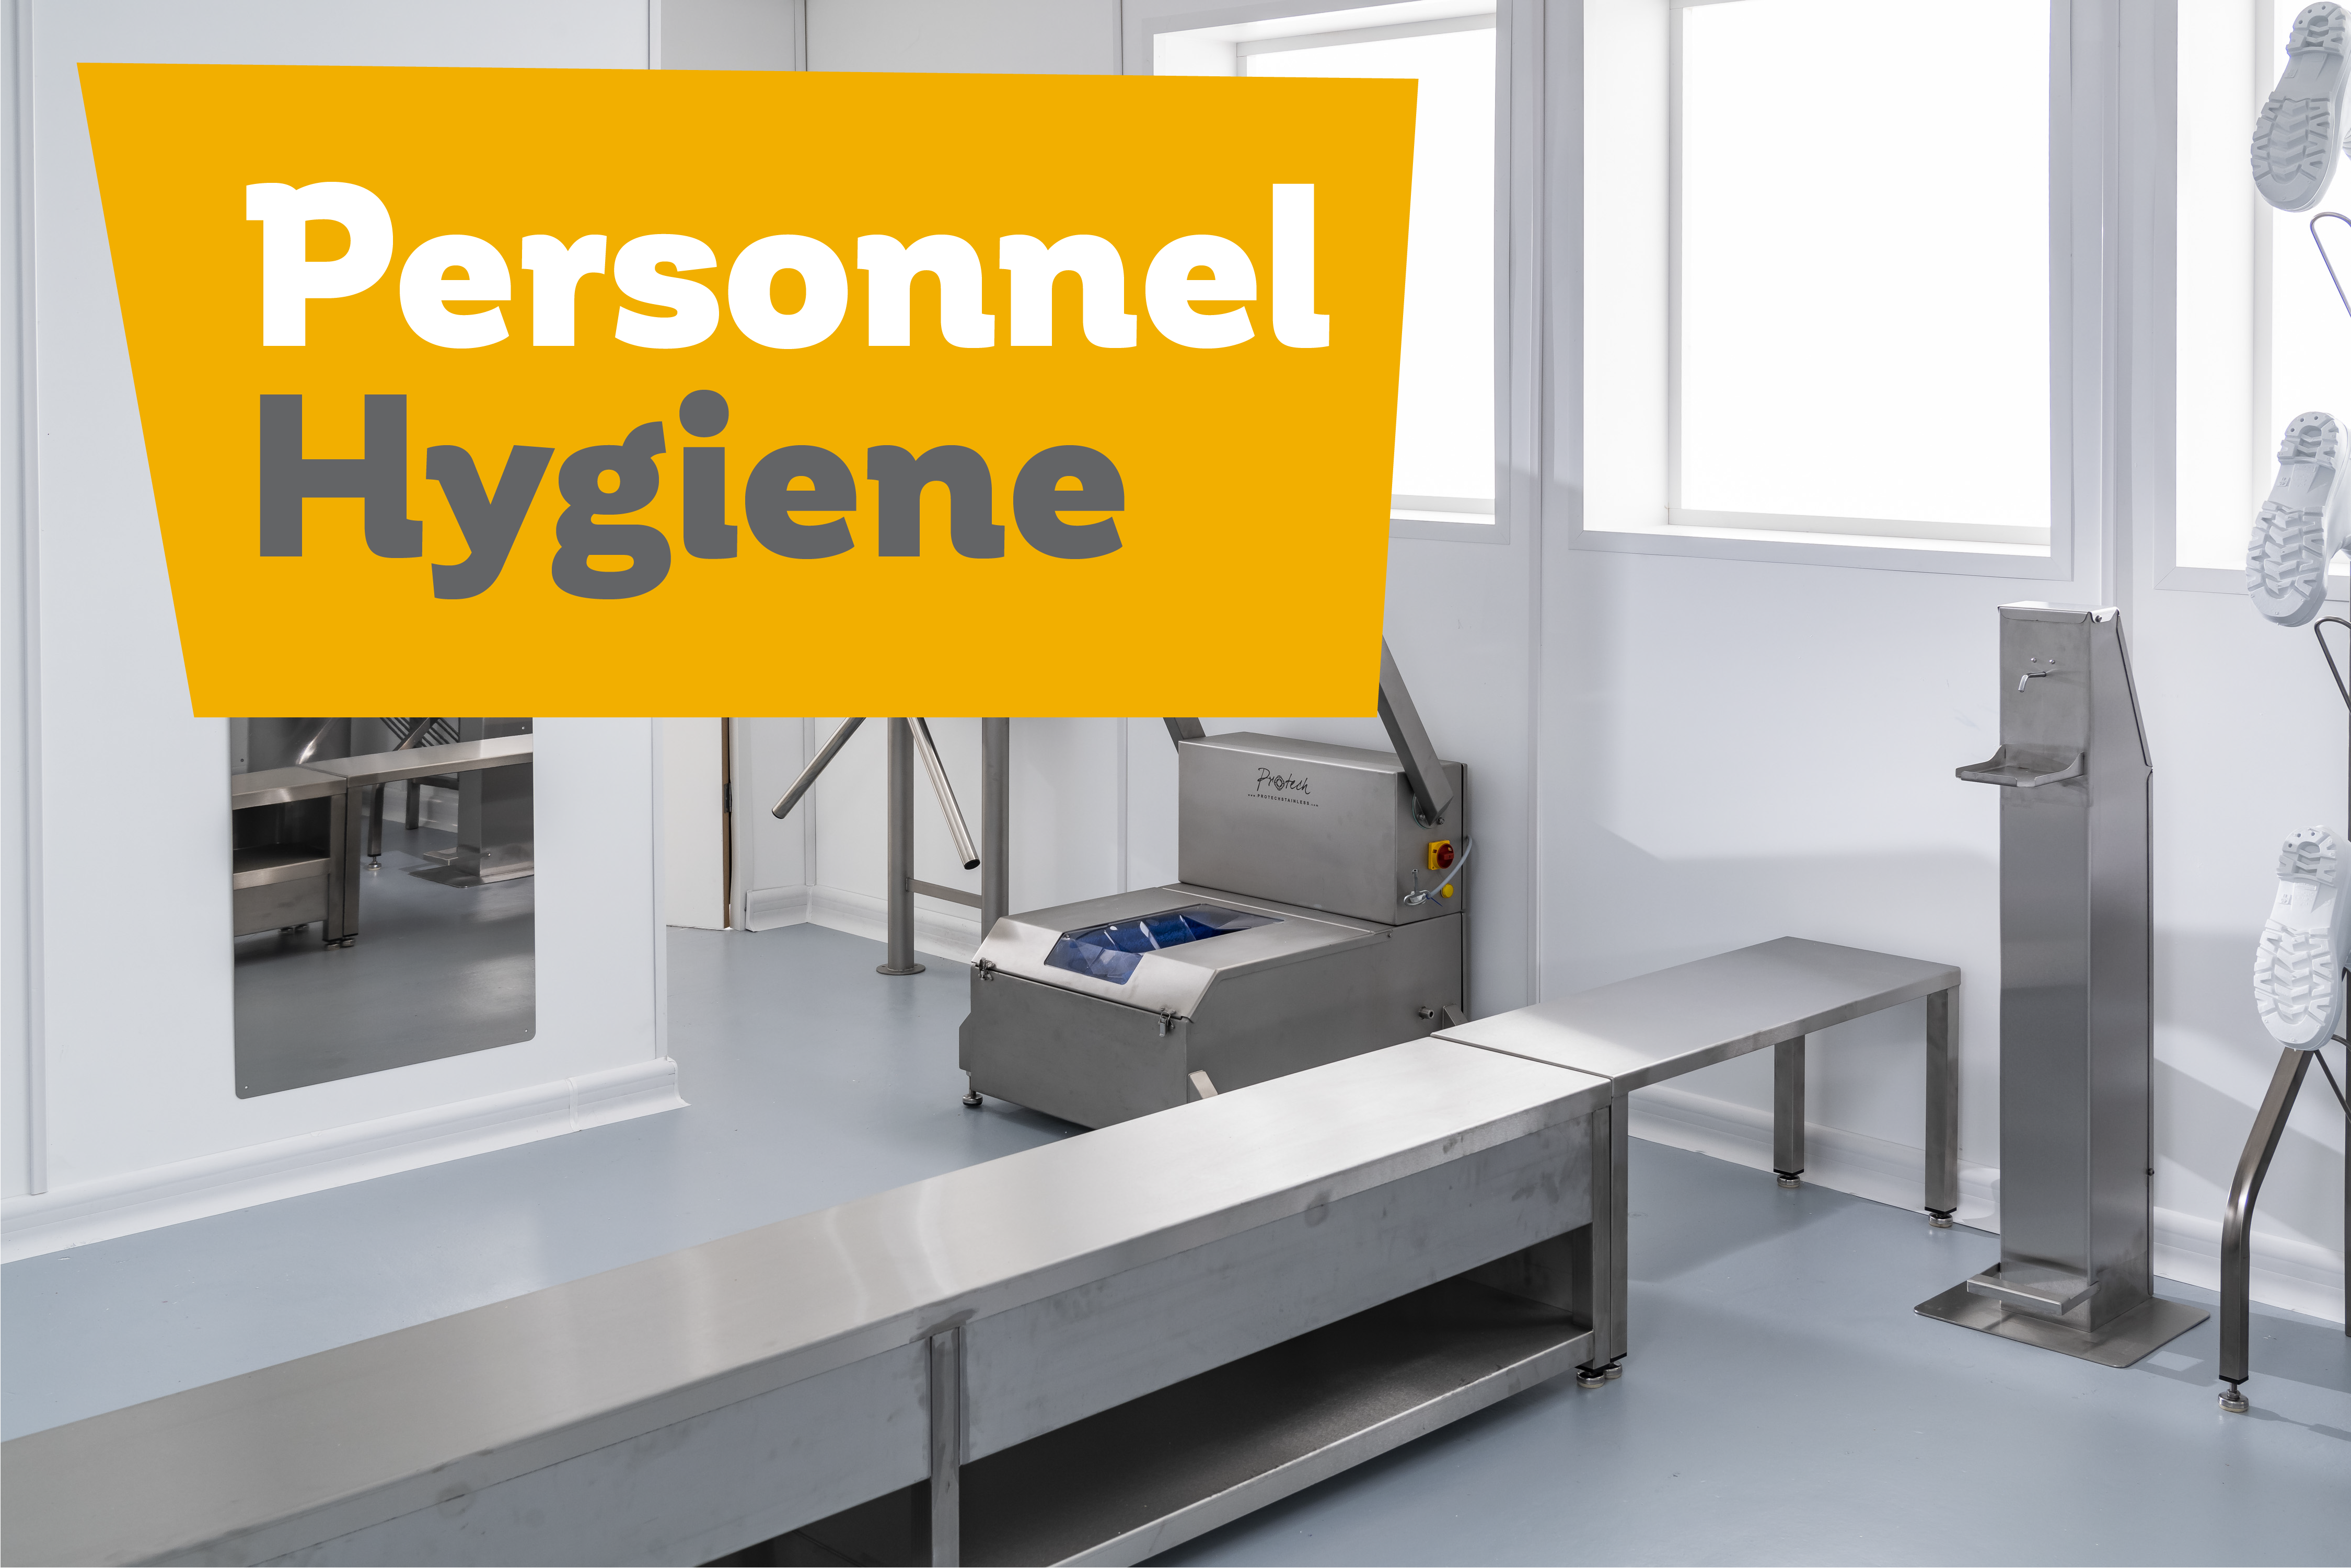 Personnel hygiene blog - creating a hygienic culture in your food processing facility